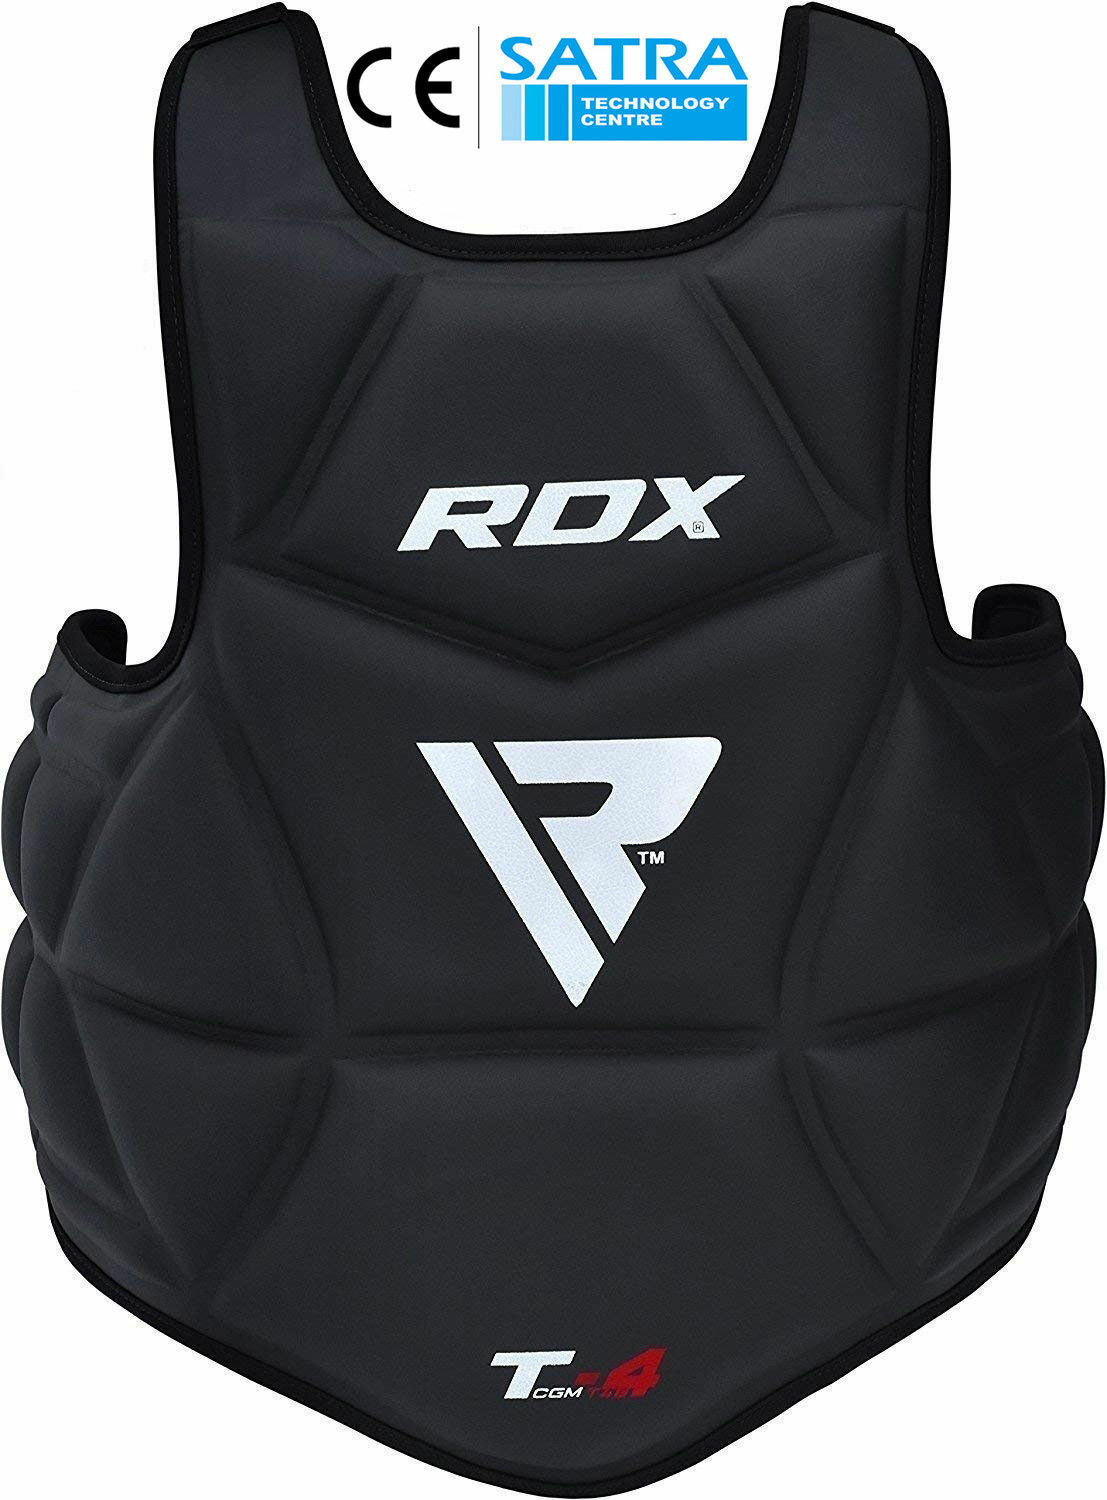 Rdx Chest Guard Gel Mma Body Protector Pad Armor Jacket Gear Boxing Padded Belly